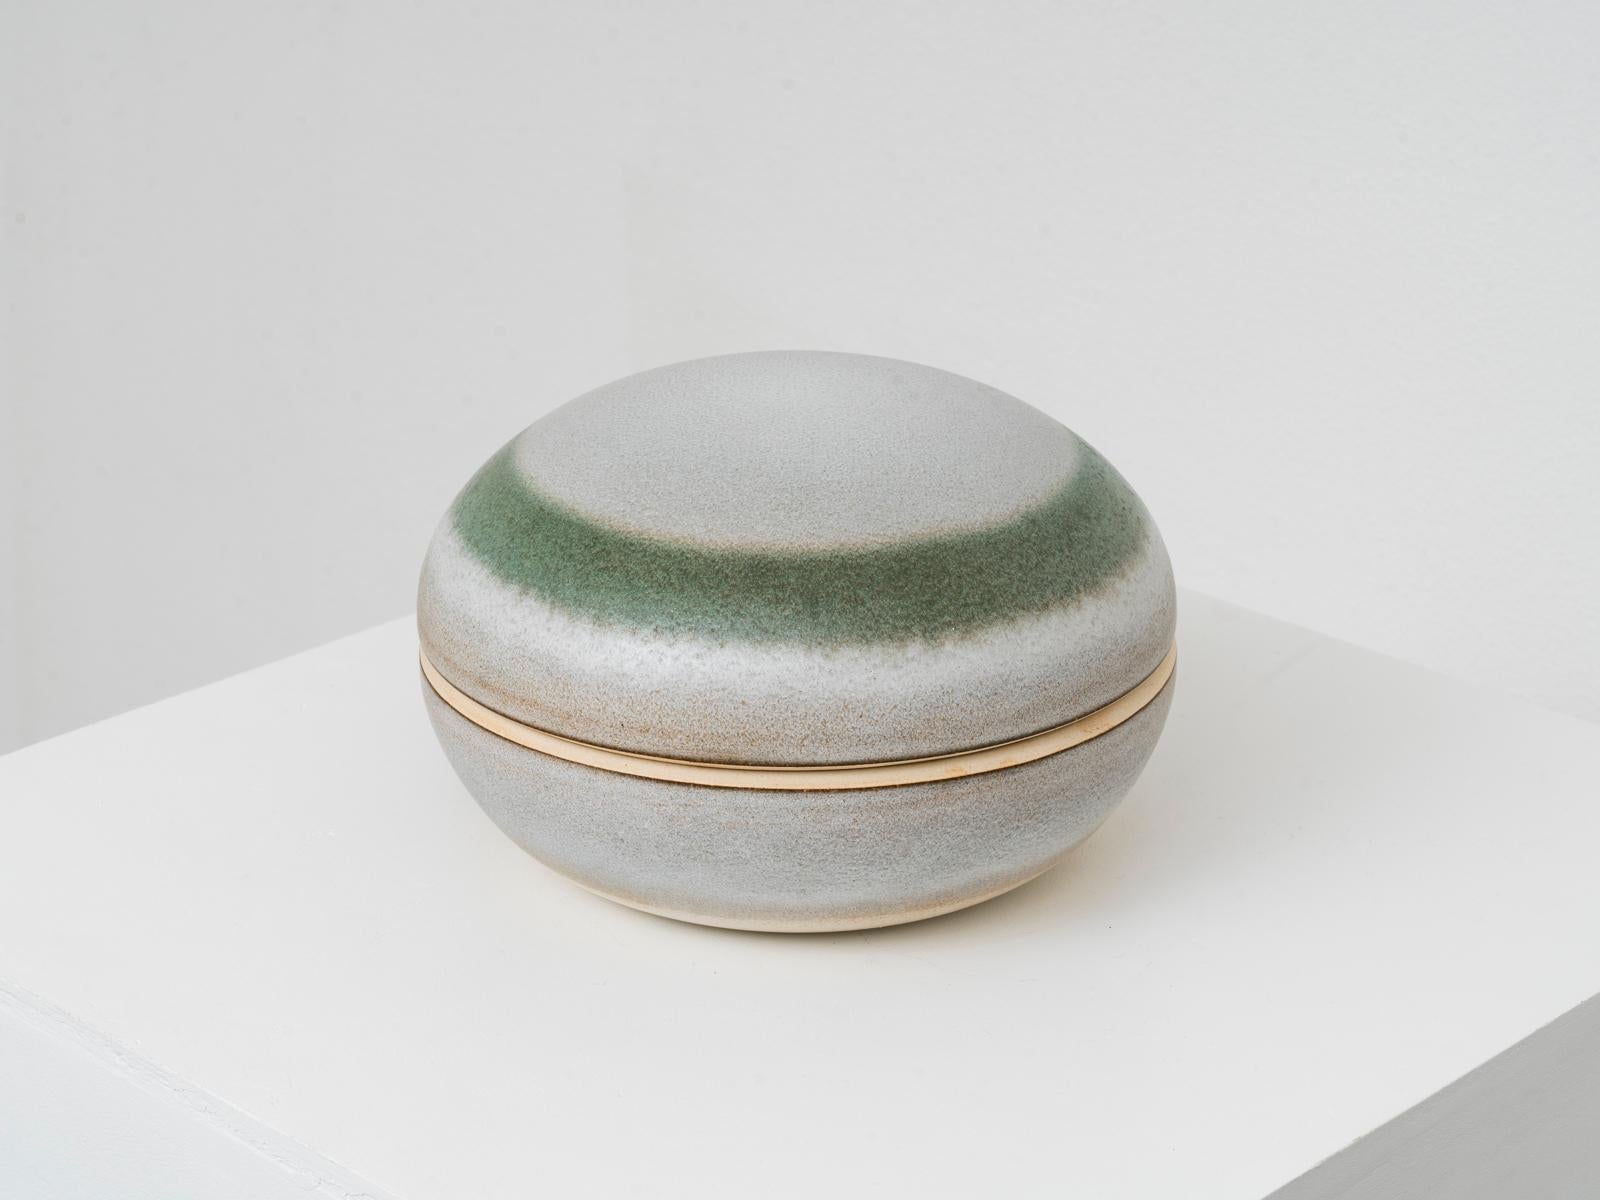 This ceramic lidded container or centerpiece was designed by Italian master ceramicist Nanni Valentini for Ceramica Arcore, where pieces were crafted by Valentini himself and Marco Terenzi. The piece is made of enameled stoneware, is signed 